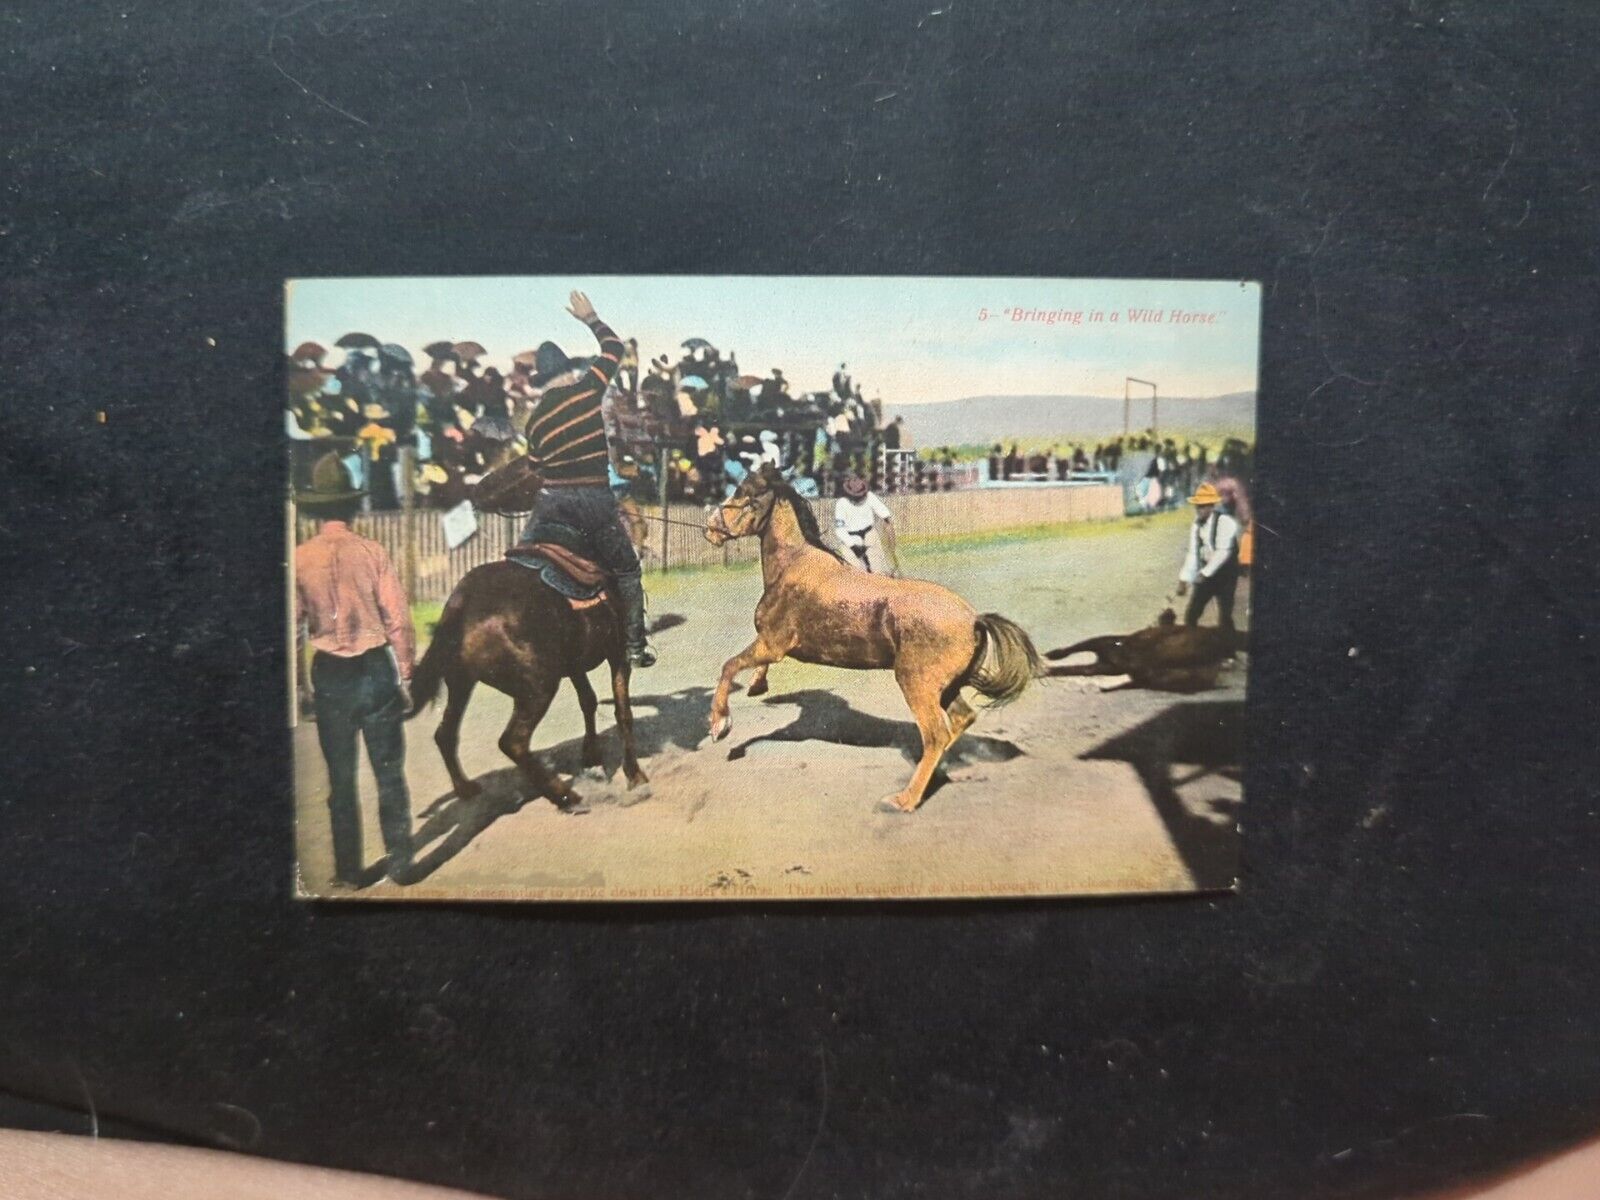 Vintage Postcard Bringing In A Wild Horse Unposted